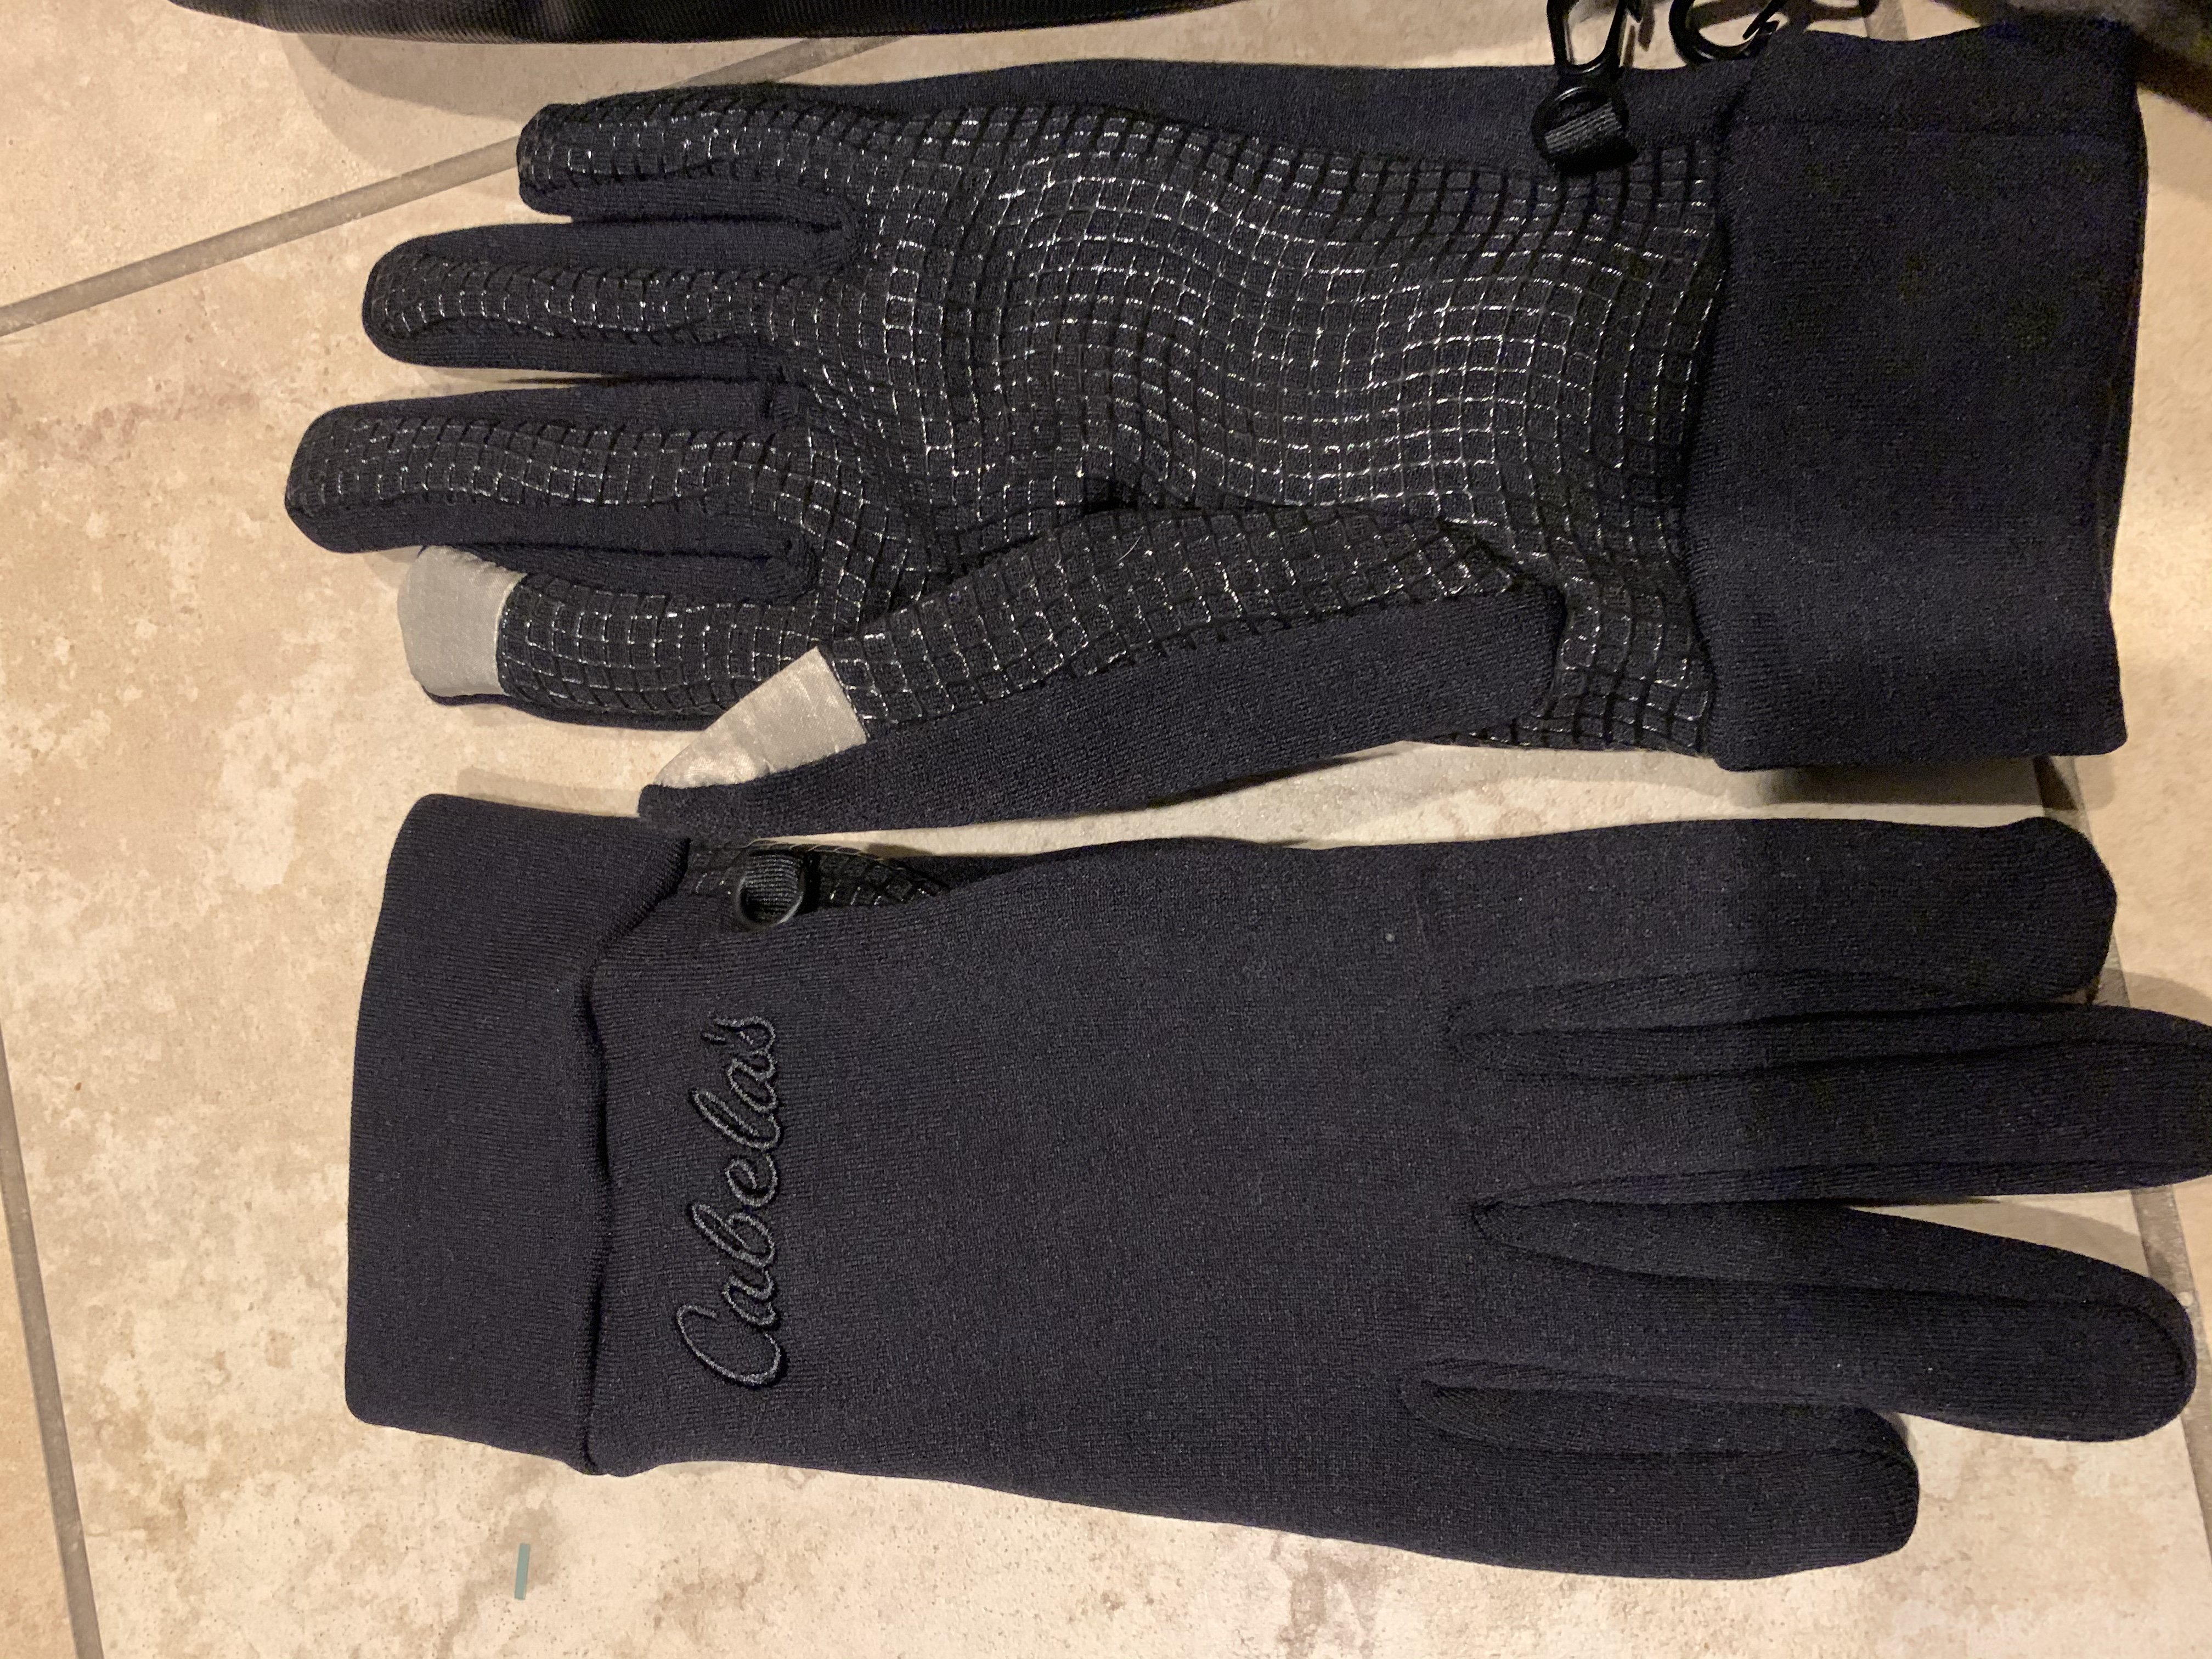 Cabela's Men's Stand Hunter Mittens with Liner Gloves - Classified Ads ...